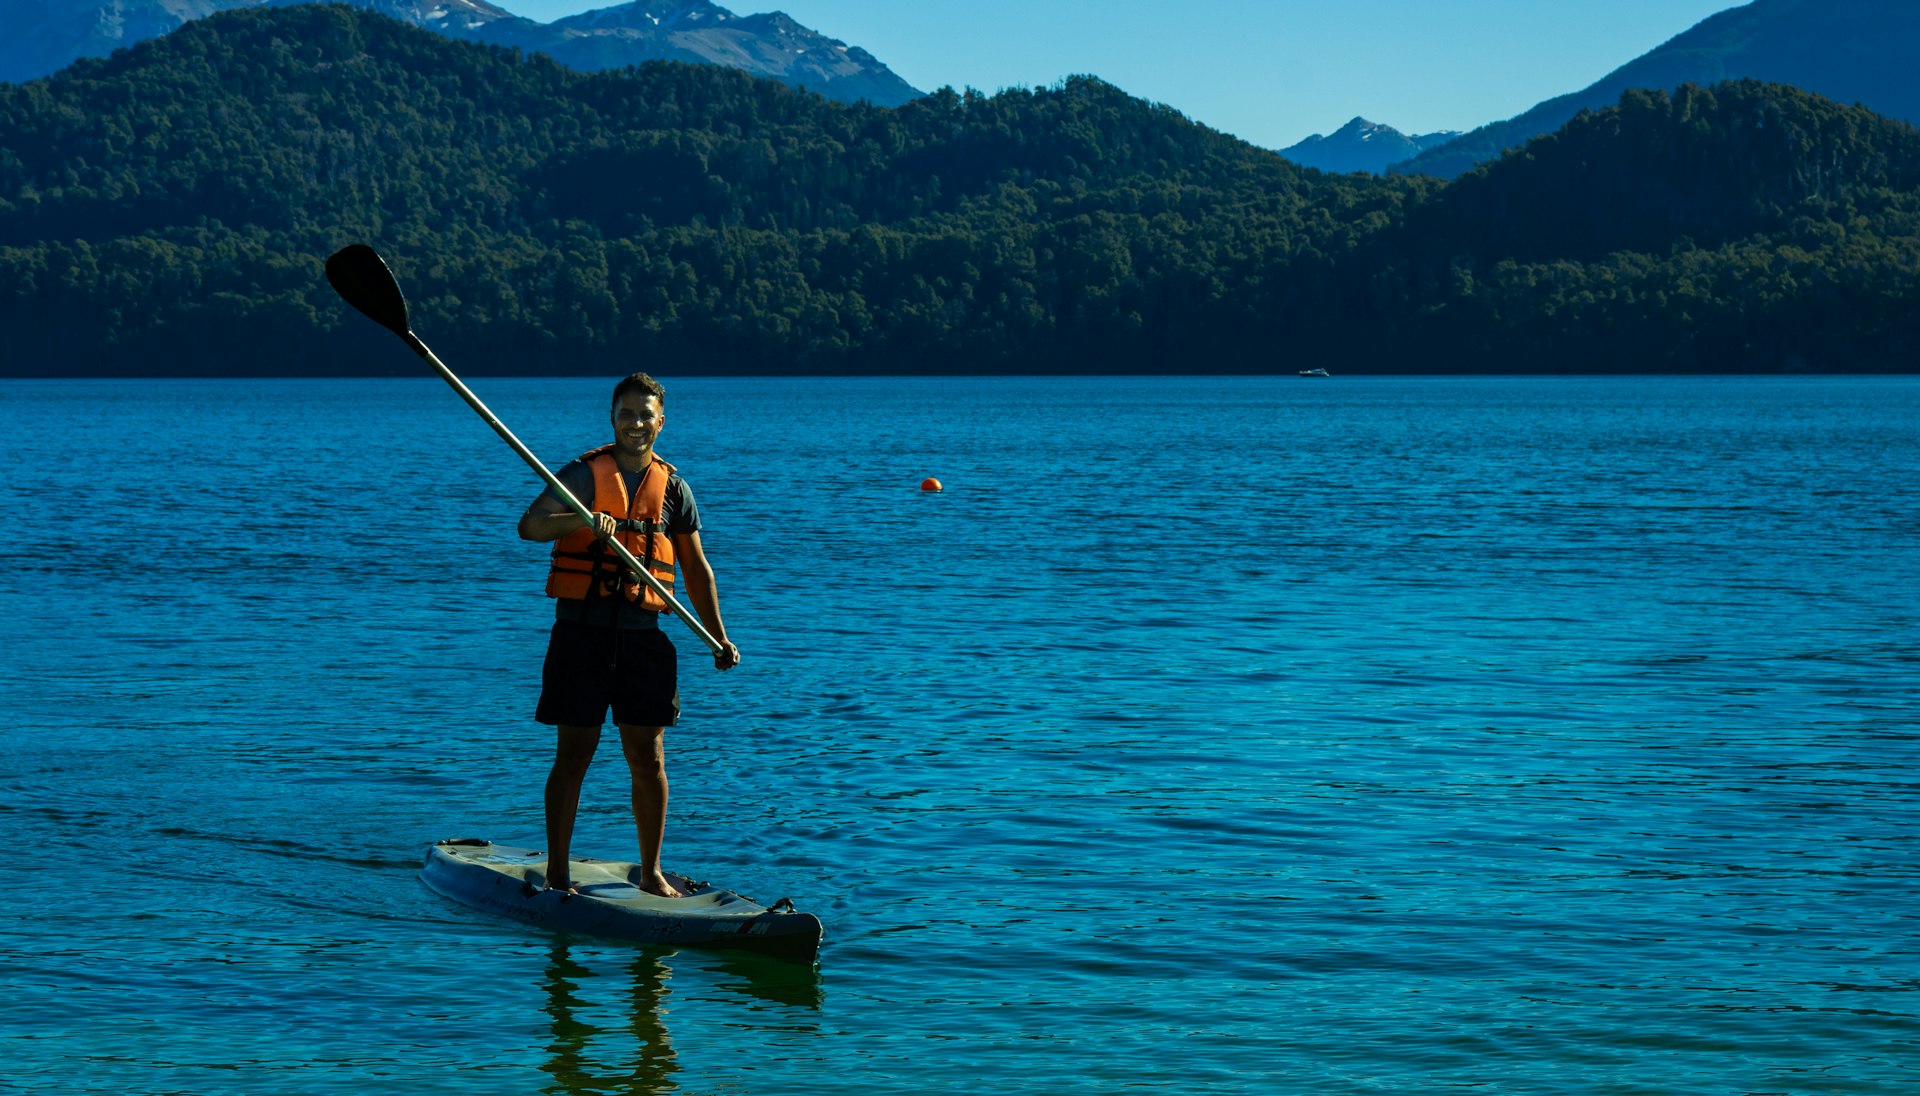 Elsewhere guide Lucas Kambic stand-up paddleboarding